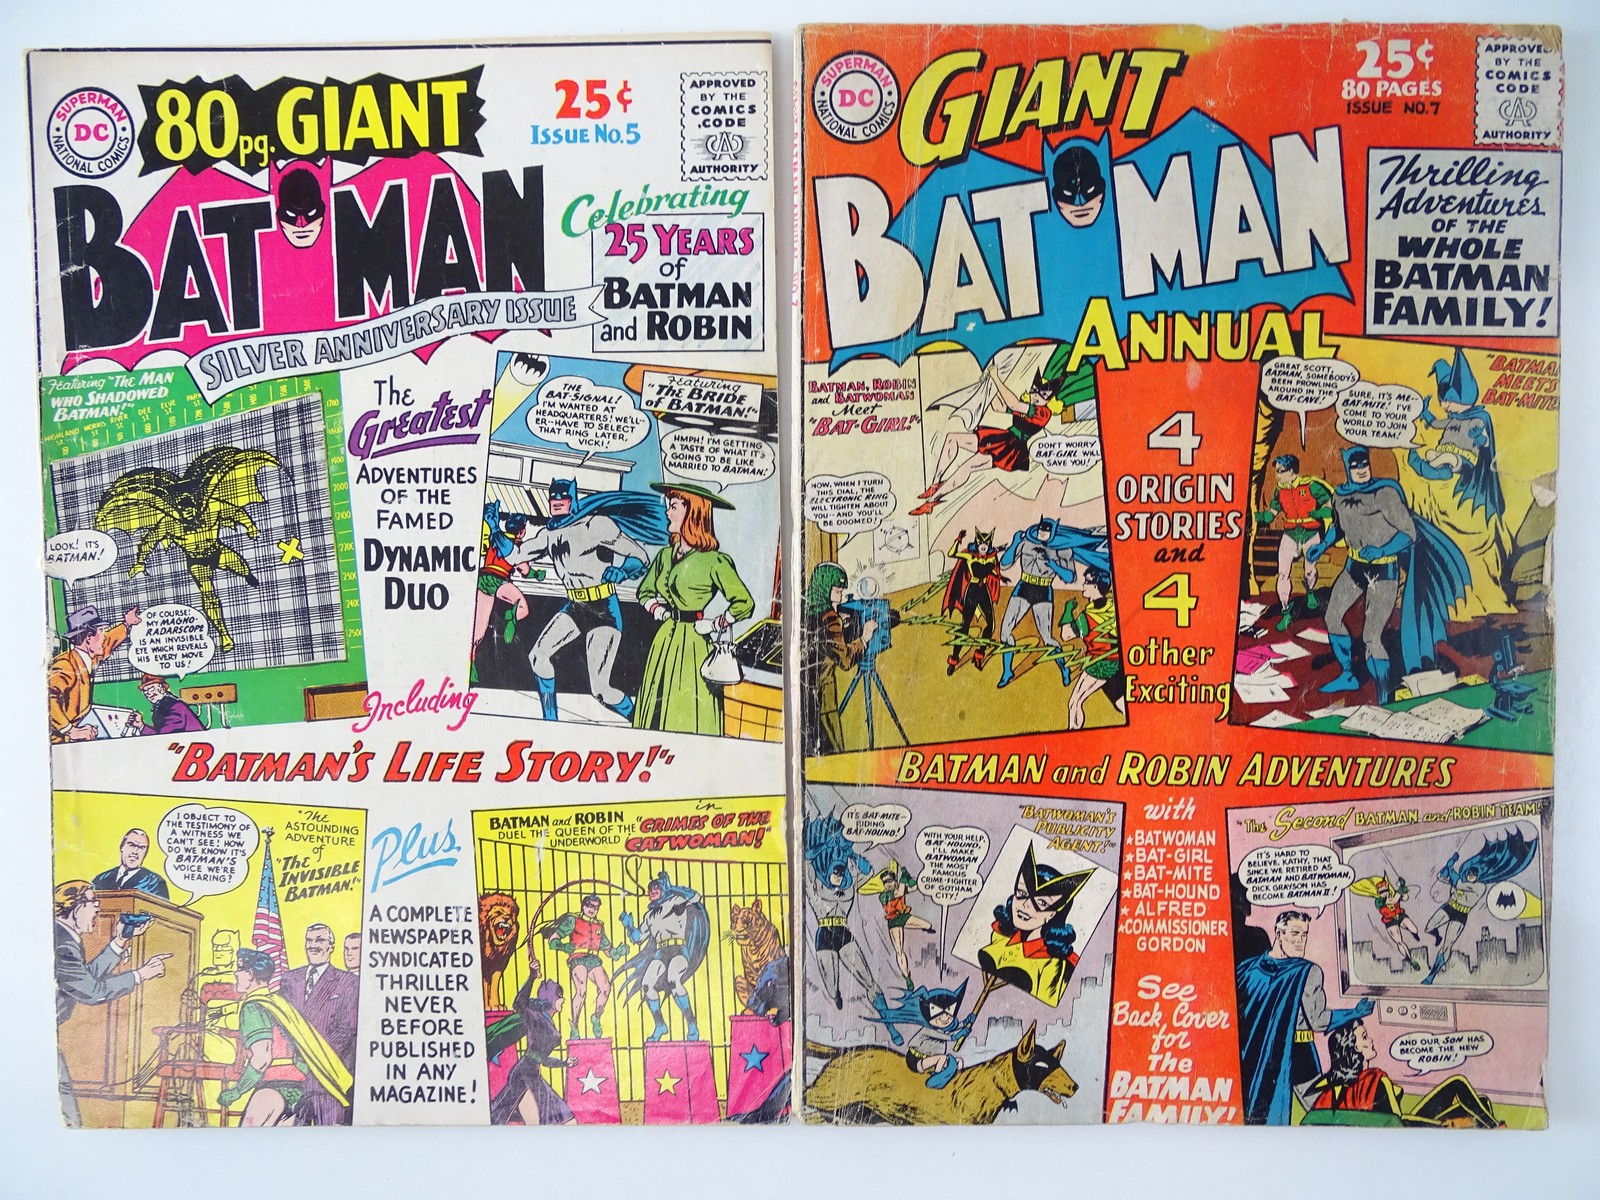 BATMAN: GIANT-SIZE #5 (SILVER ANNIVERSARY) & #7 - (1964 - DC) - Flat/Unfolded - a photographic